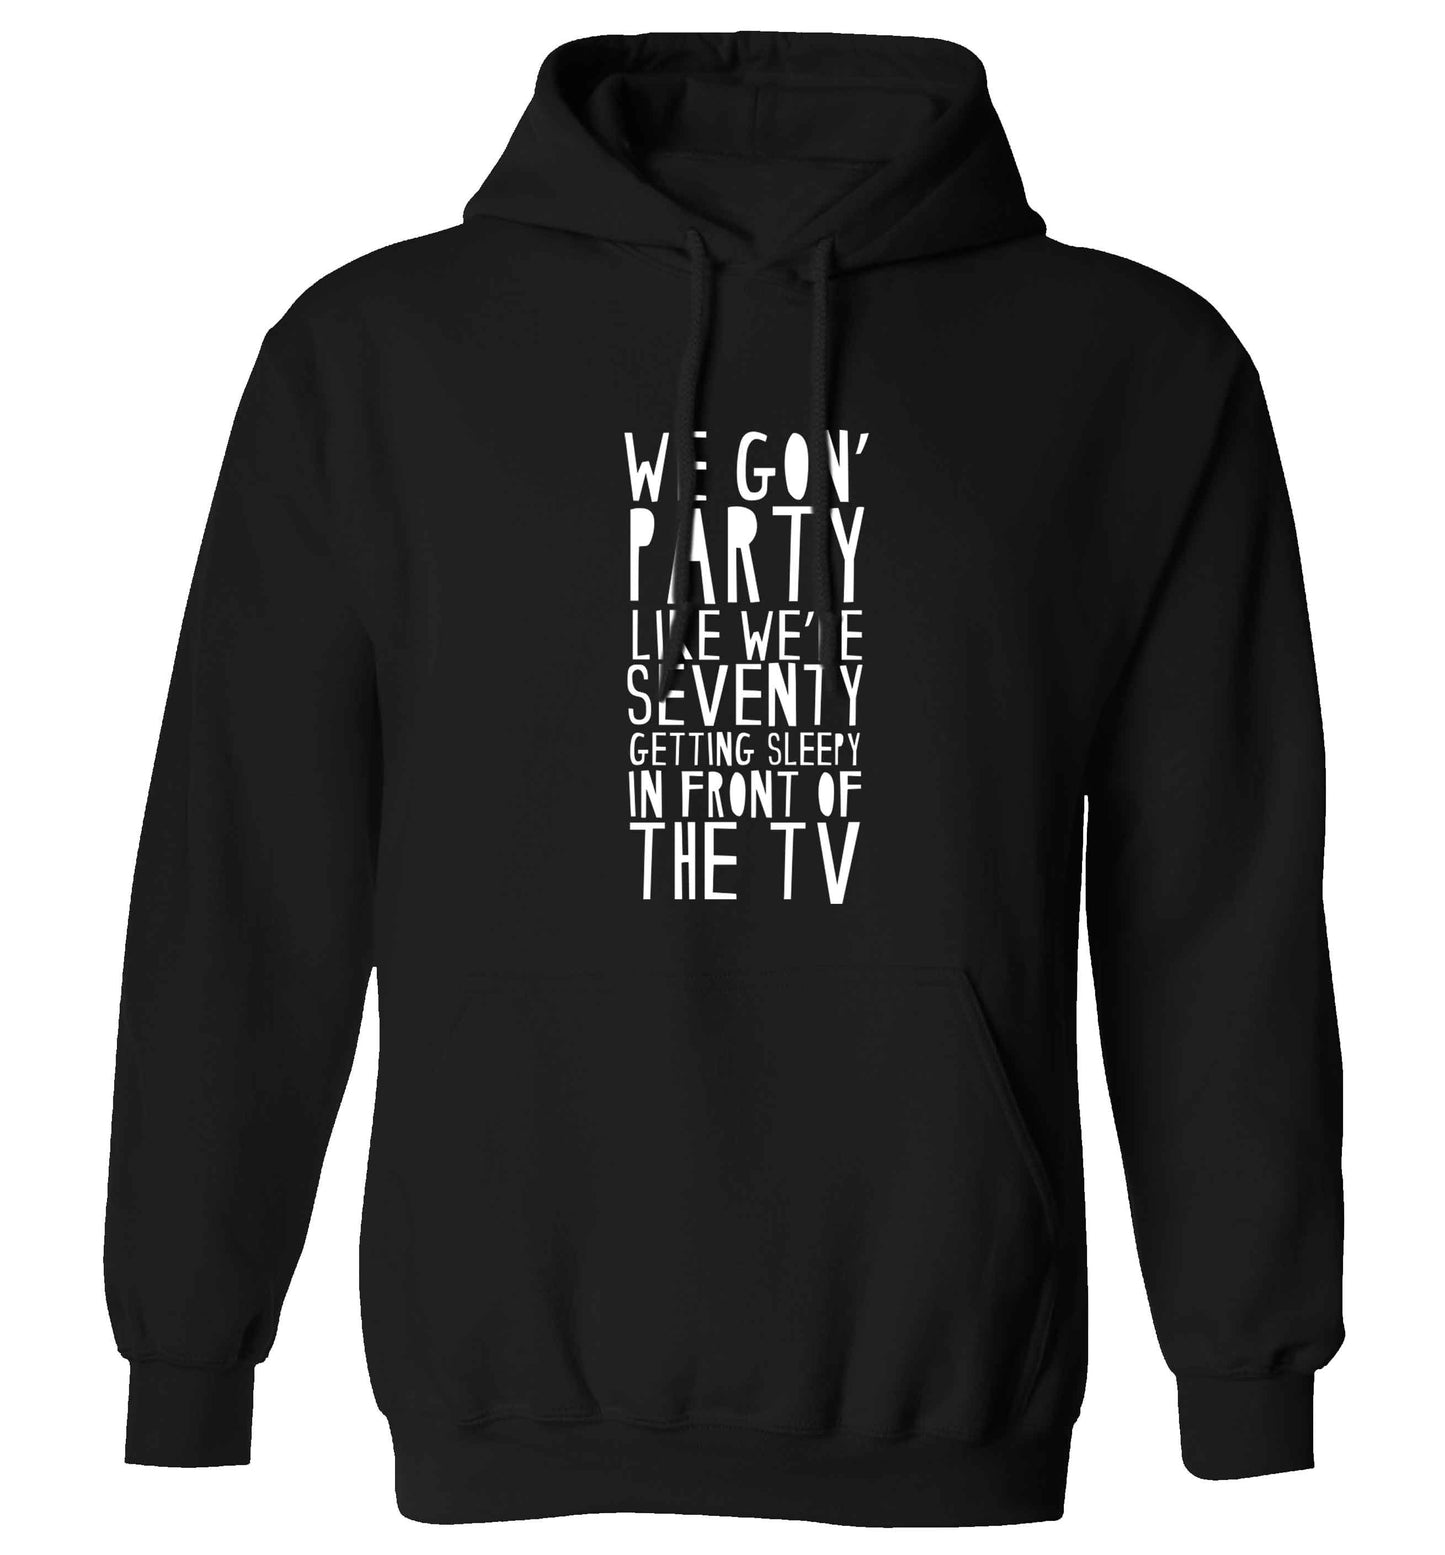 We gon' party like we're seventy getting sleepy in front of the TV adults unisex black hoodie 2XL